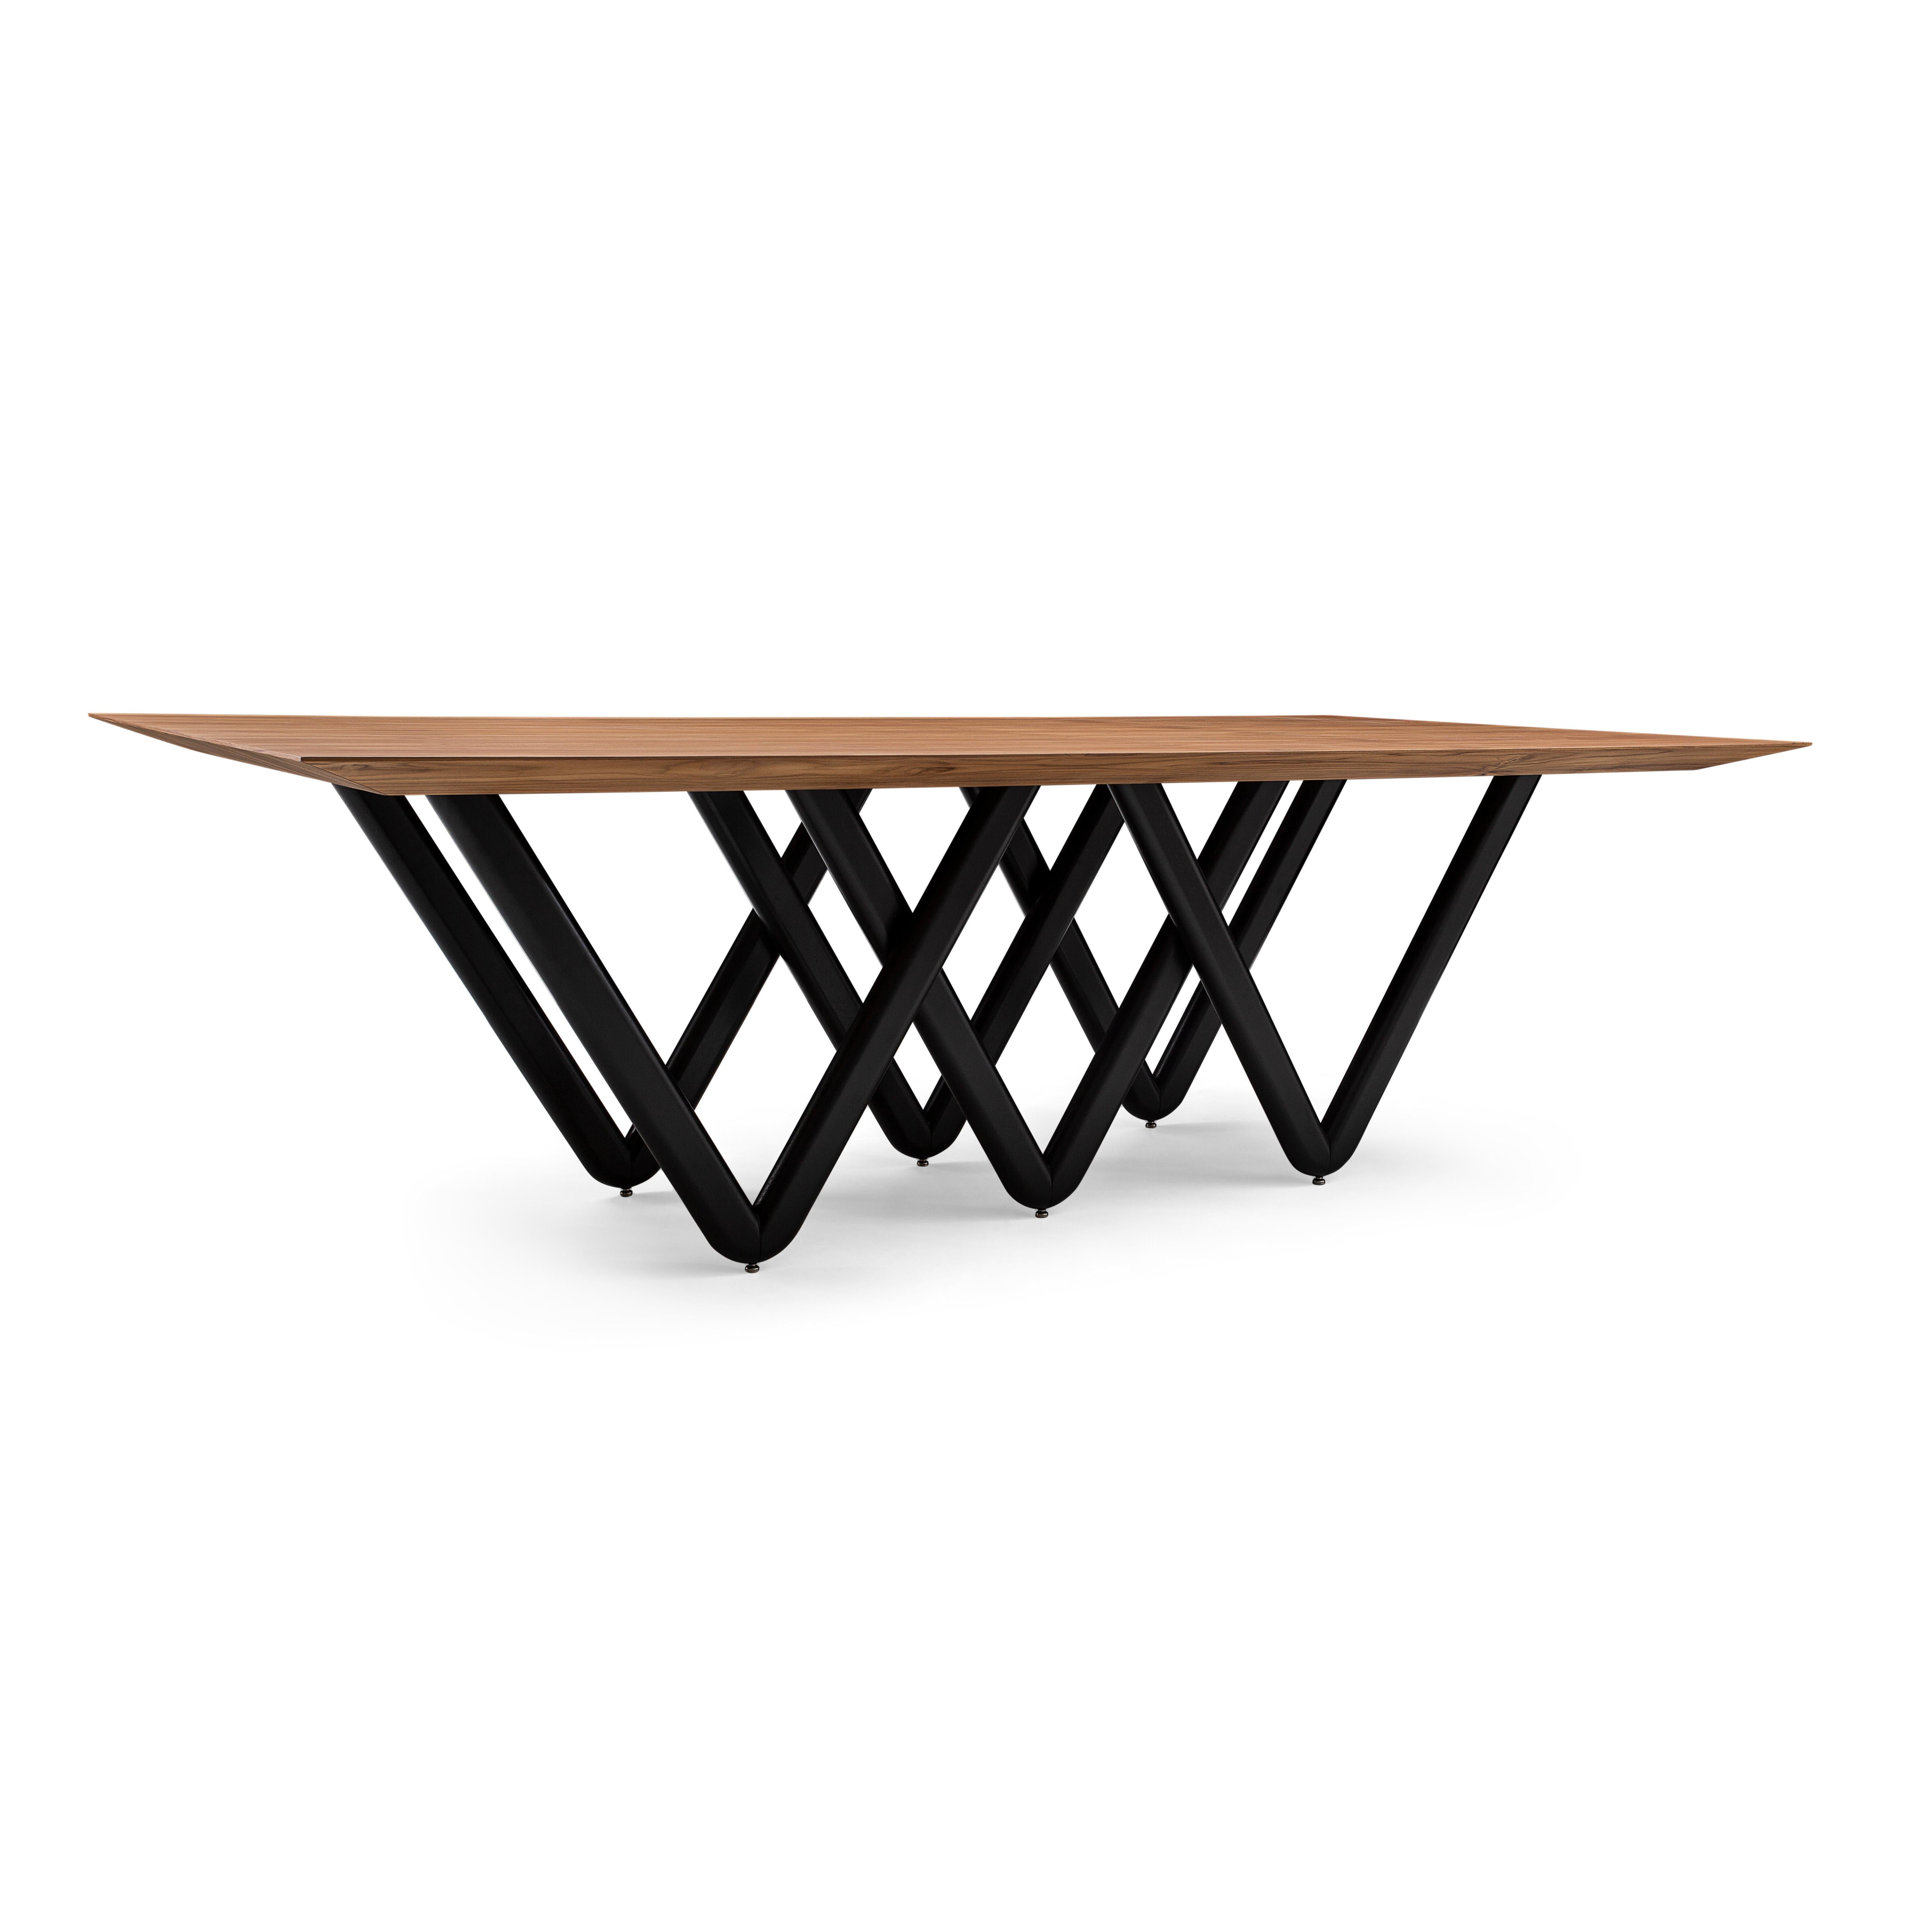 The Dablio dining table features a white-painted intersecting V-shaped base that is highlighted by a stunning Walnut veneered tabletop. It has a very singular and original structure and at the same time, it is a very simple but modern dining table.